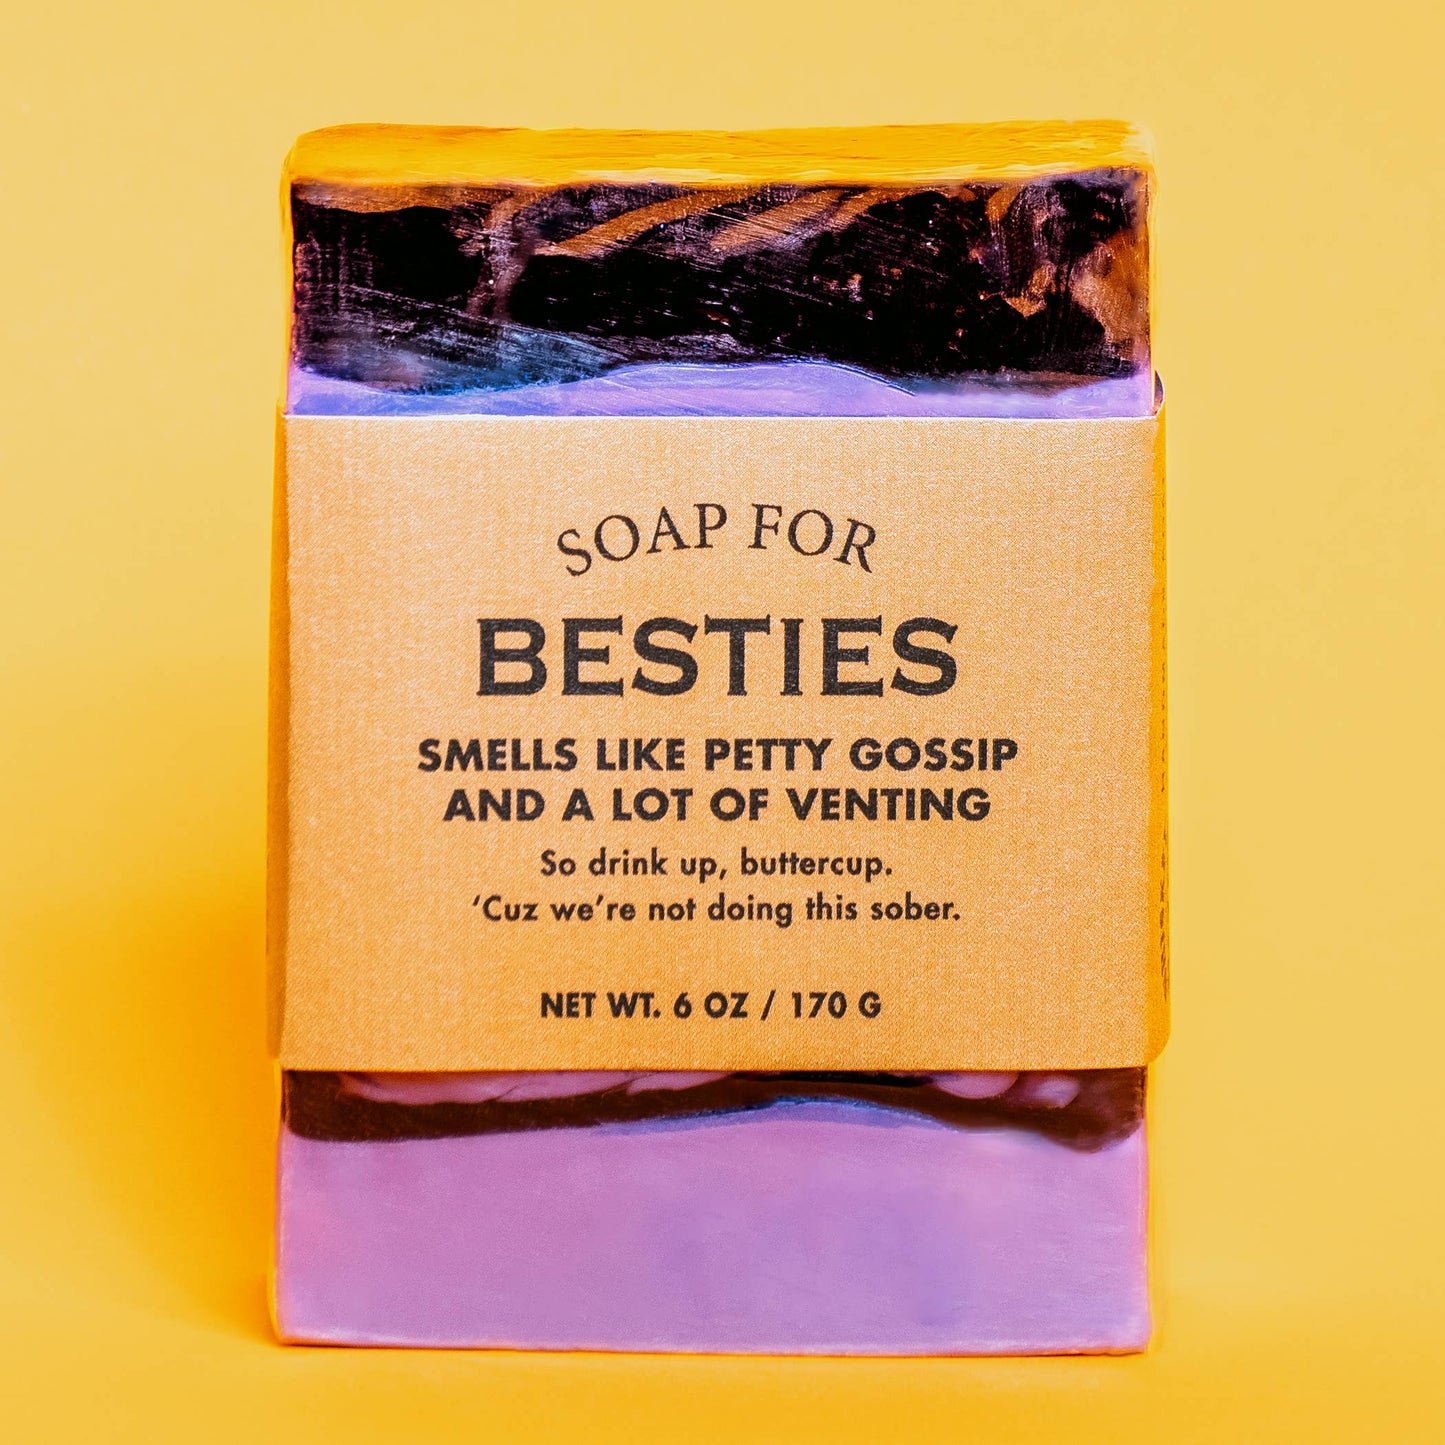 A Soap for Besties | Funny Soap | Stocking Stuffer